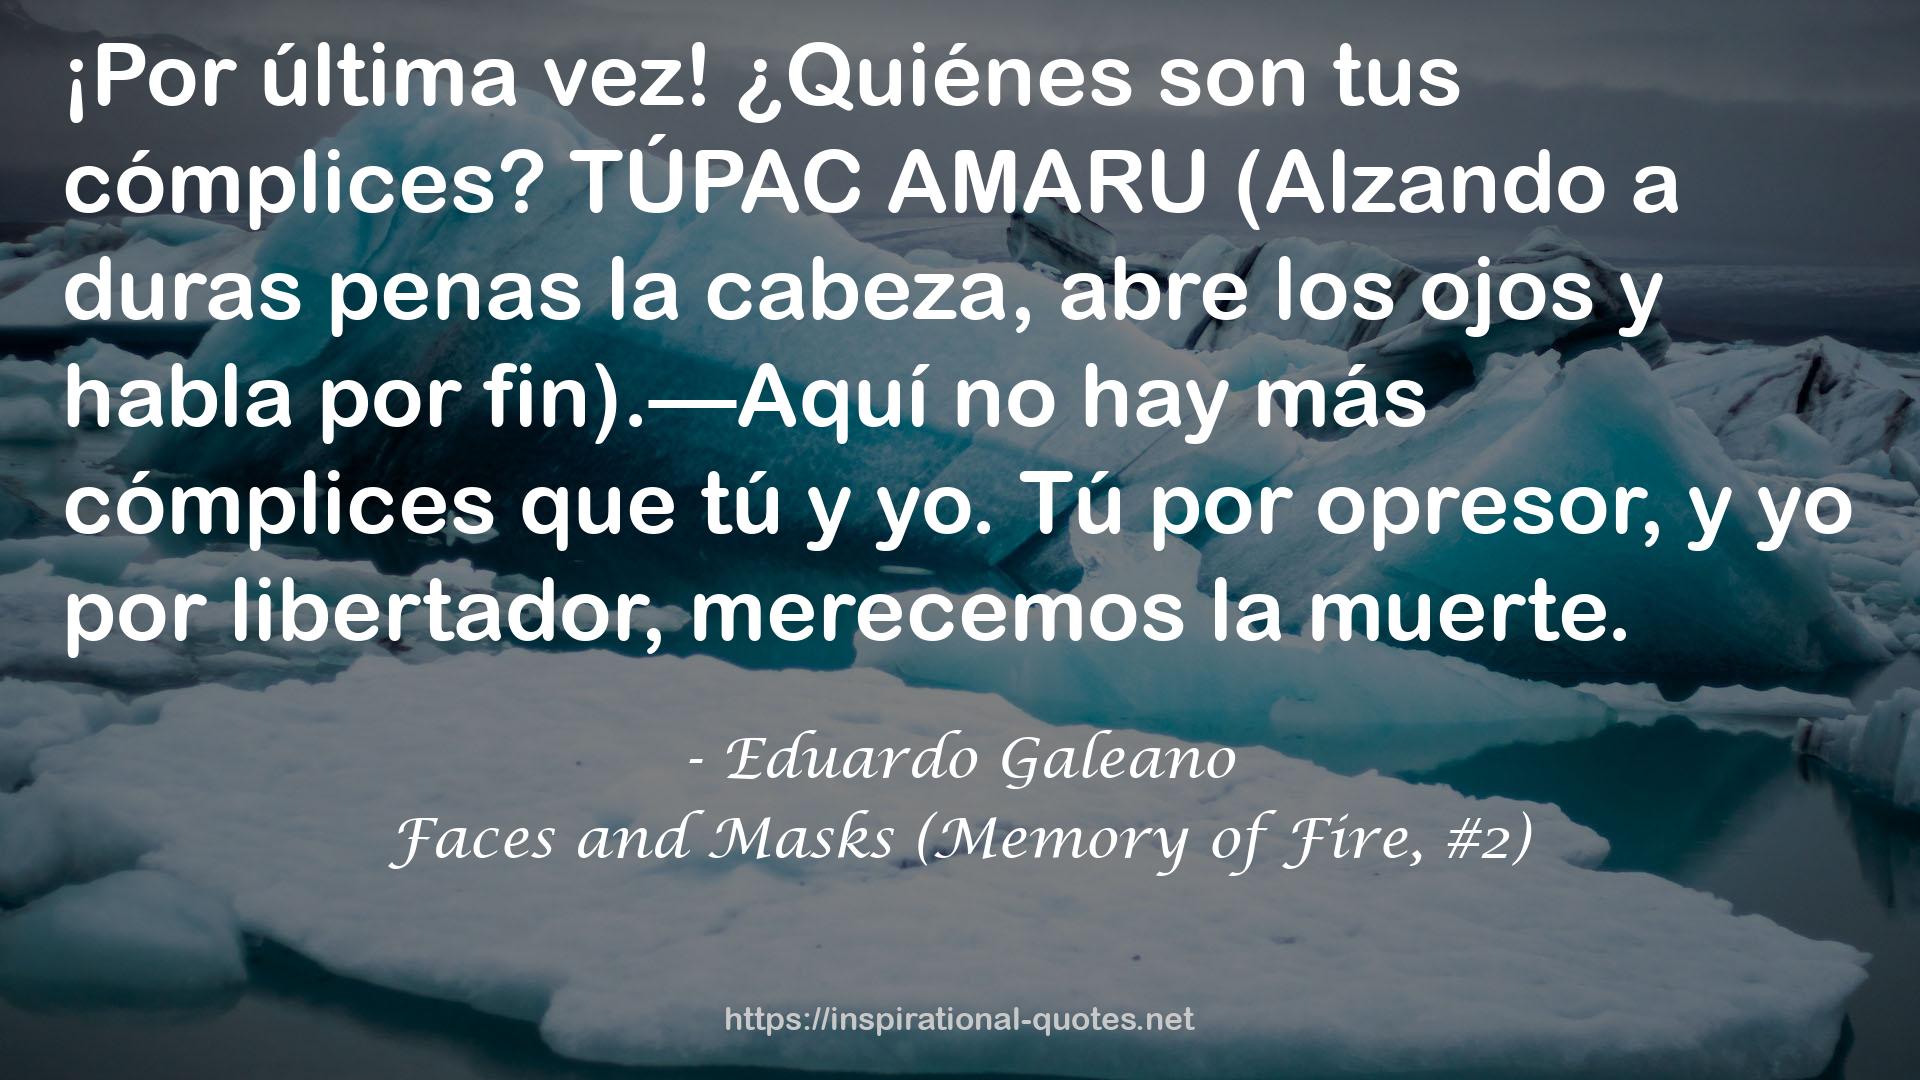 Faces and Masks (Memory of Fire, #2) QUOTES